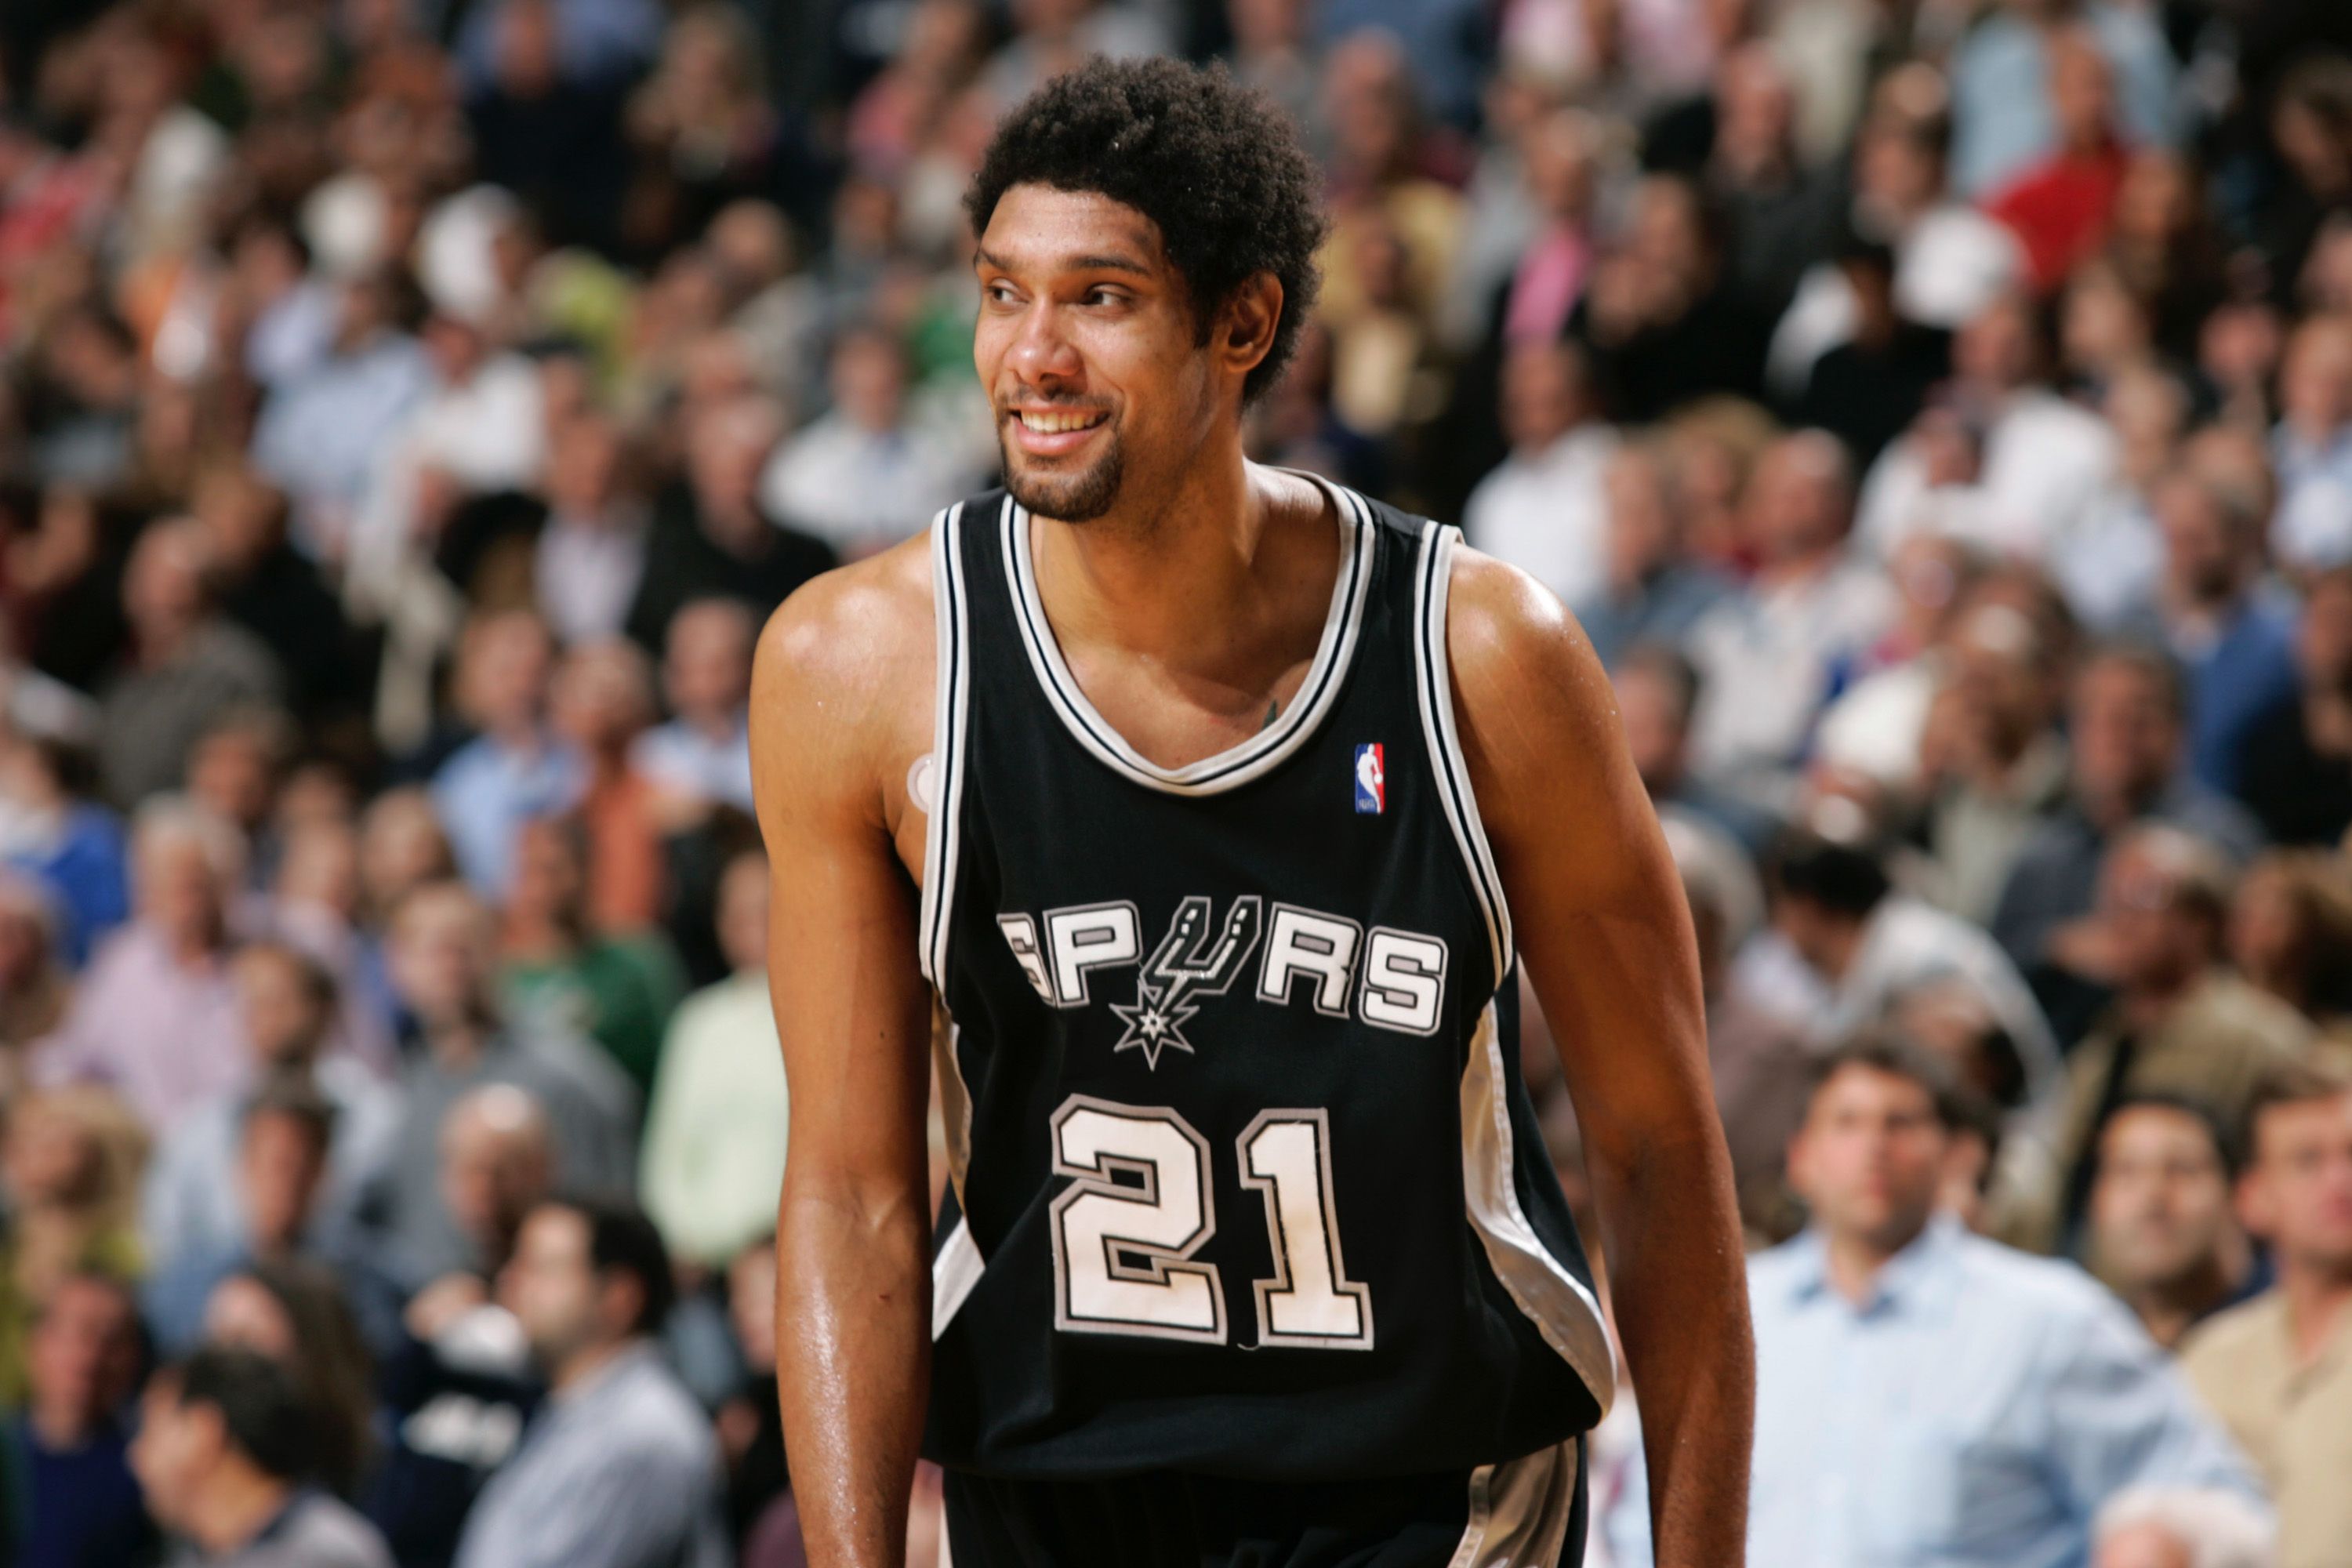 Tim Duncan smiles after his team pulled out a 92-90 win against the Dallas Mavericks on December 1, 2005 at American Airlines Center in Dallas, Texas. | Photo: Getty Images